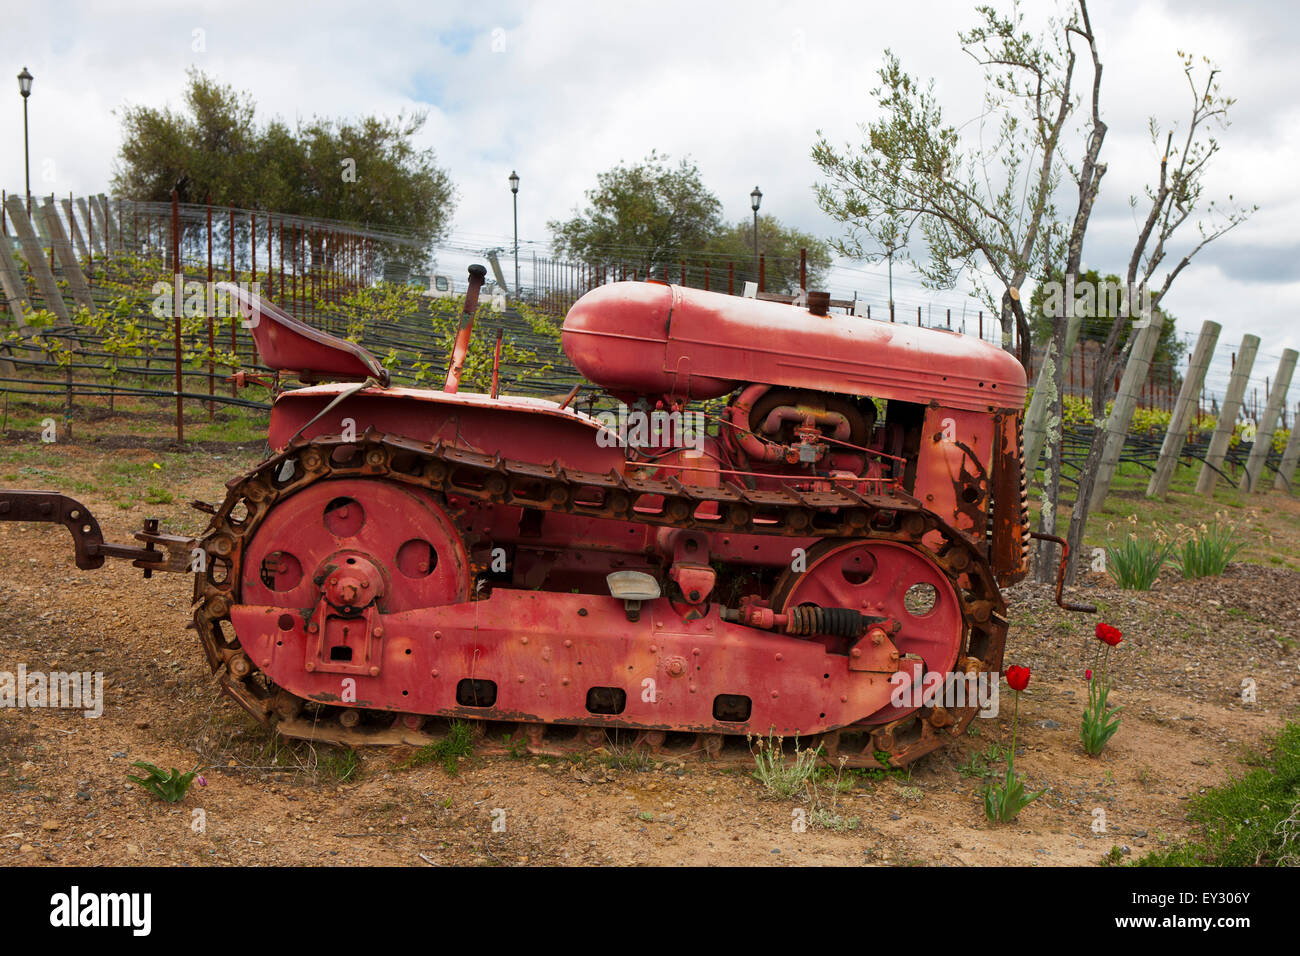 Red rusted tractor in front of vineyard vines, Paul Masson Mountain Winery, Saratoga, California, United States of America Stock Photo